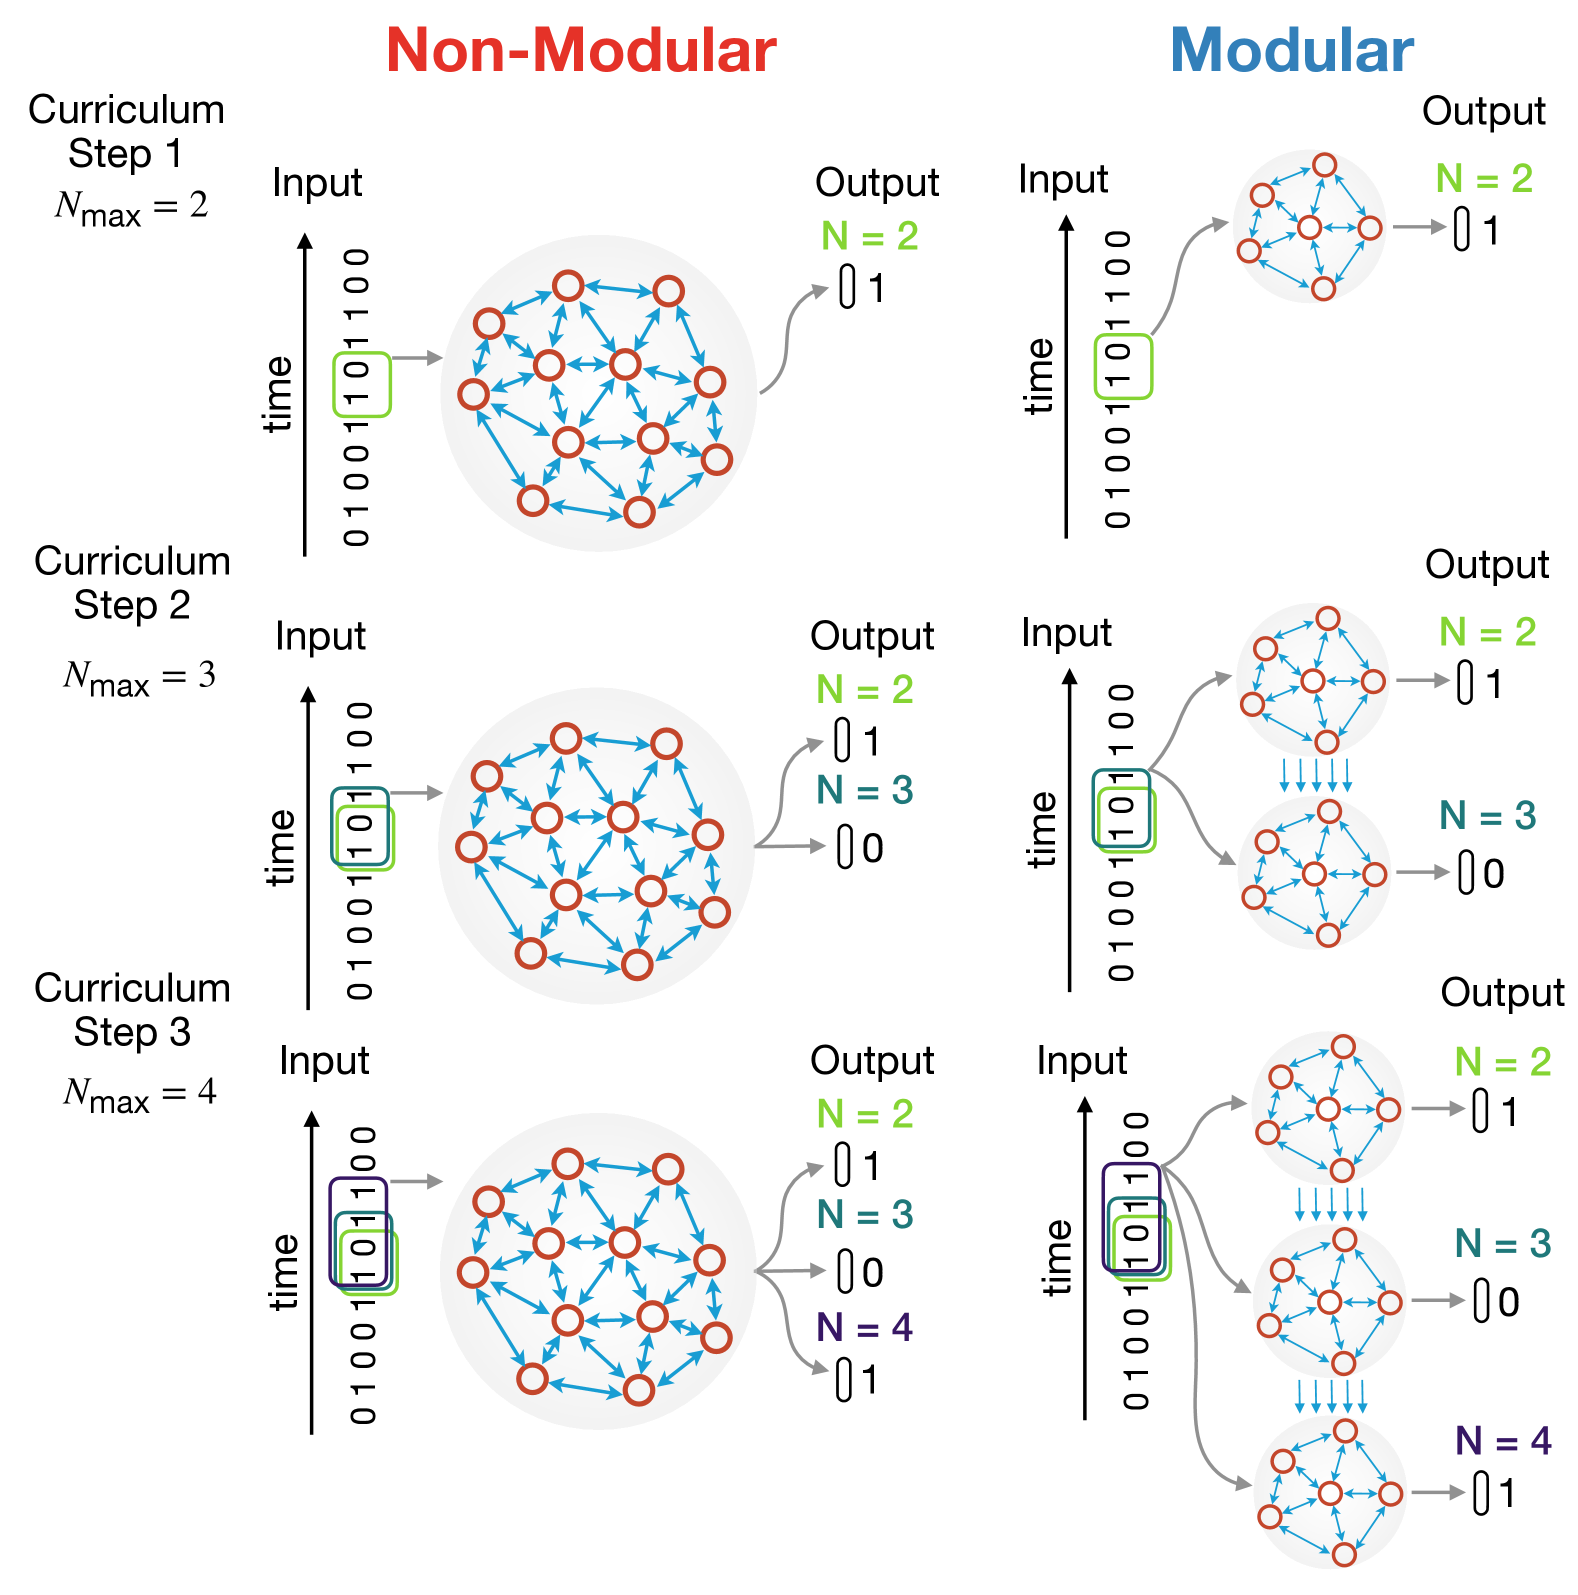 Modular Growth of Hierarchical Networks: Efficient, General, and Robust Curriculum Learning